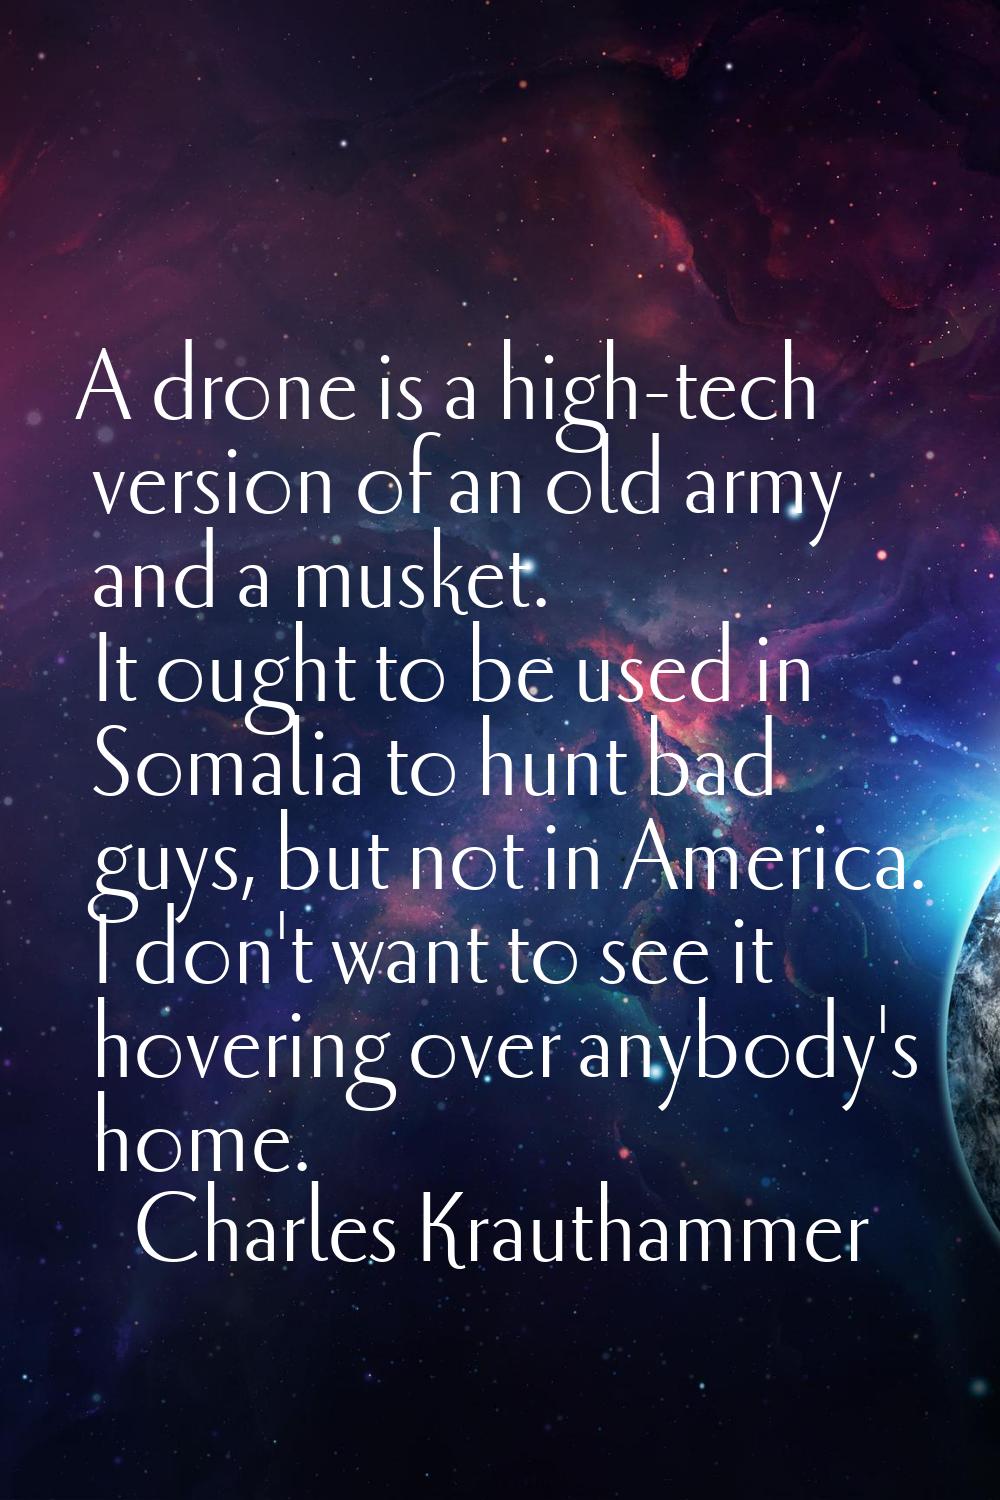 A drone is a high-tech version of an old army and a musket. It ought to be used in Somalia to hunt 